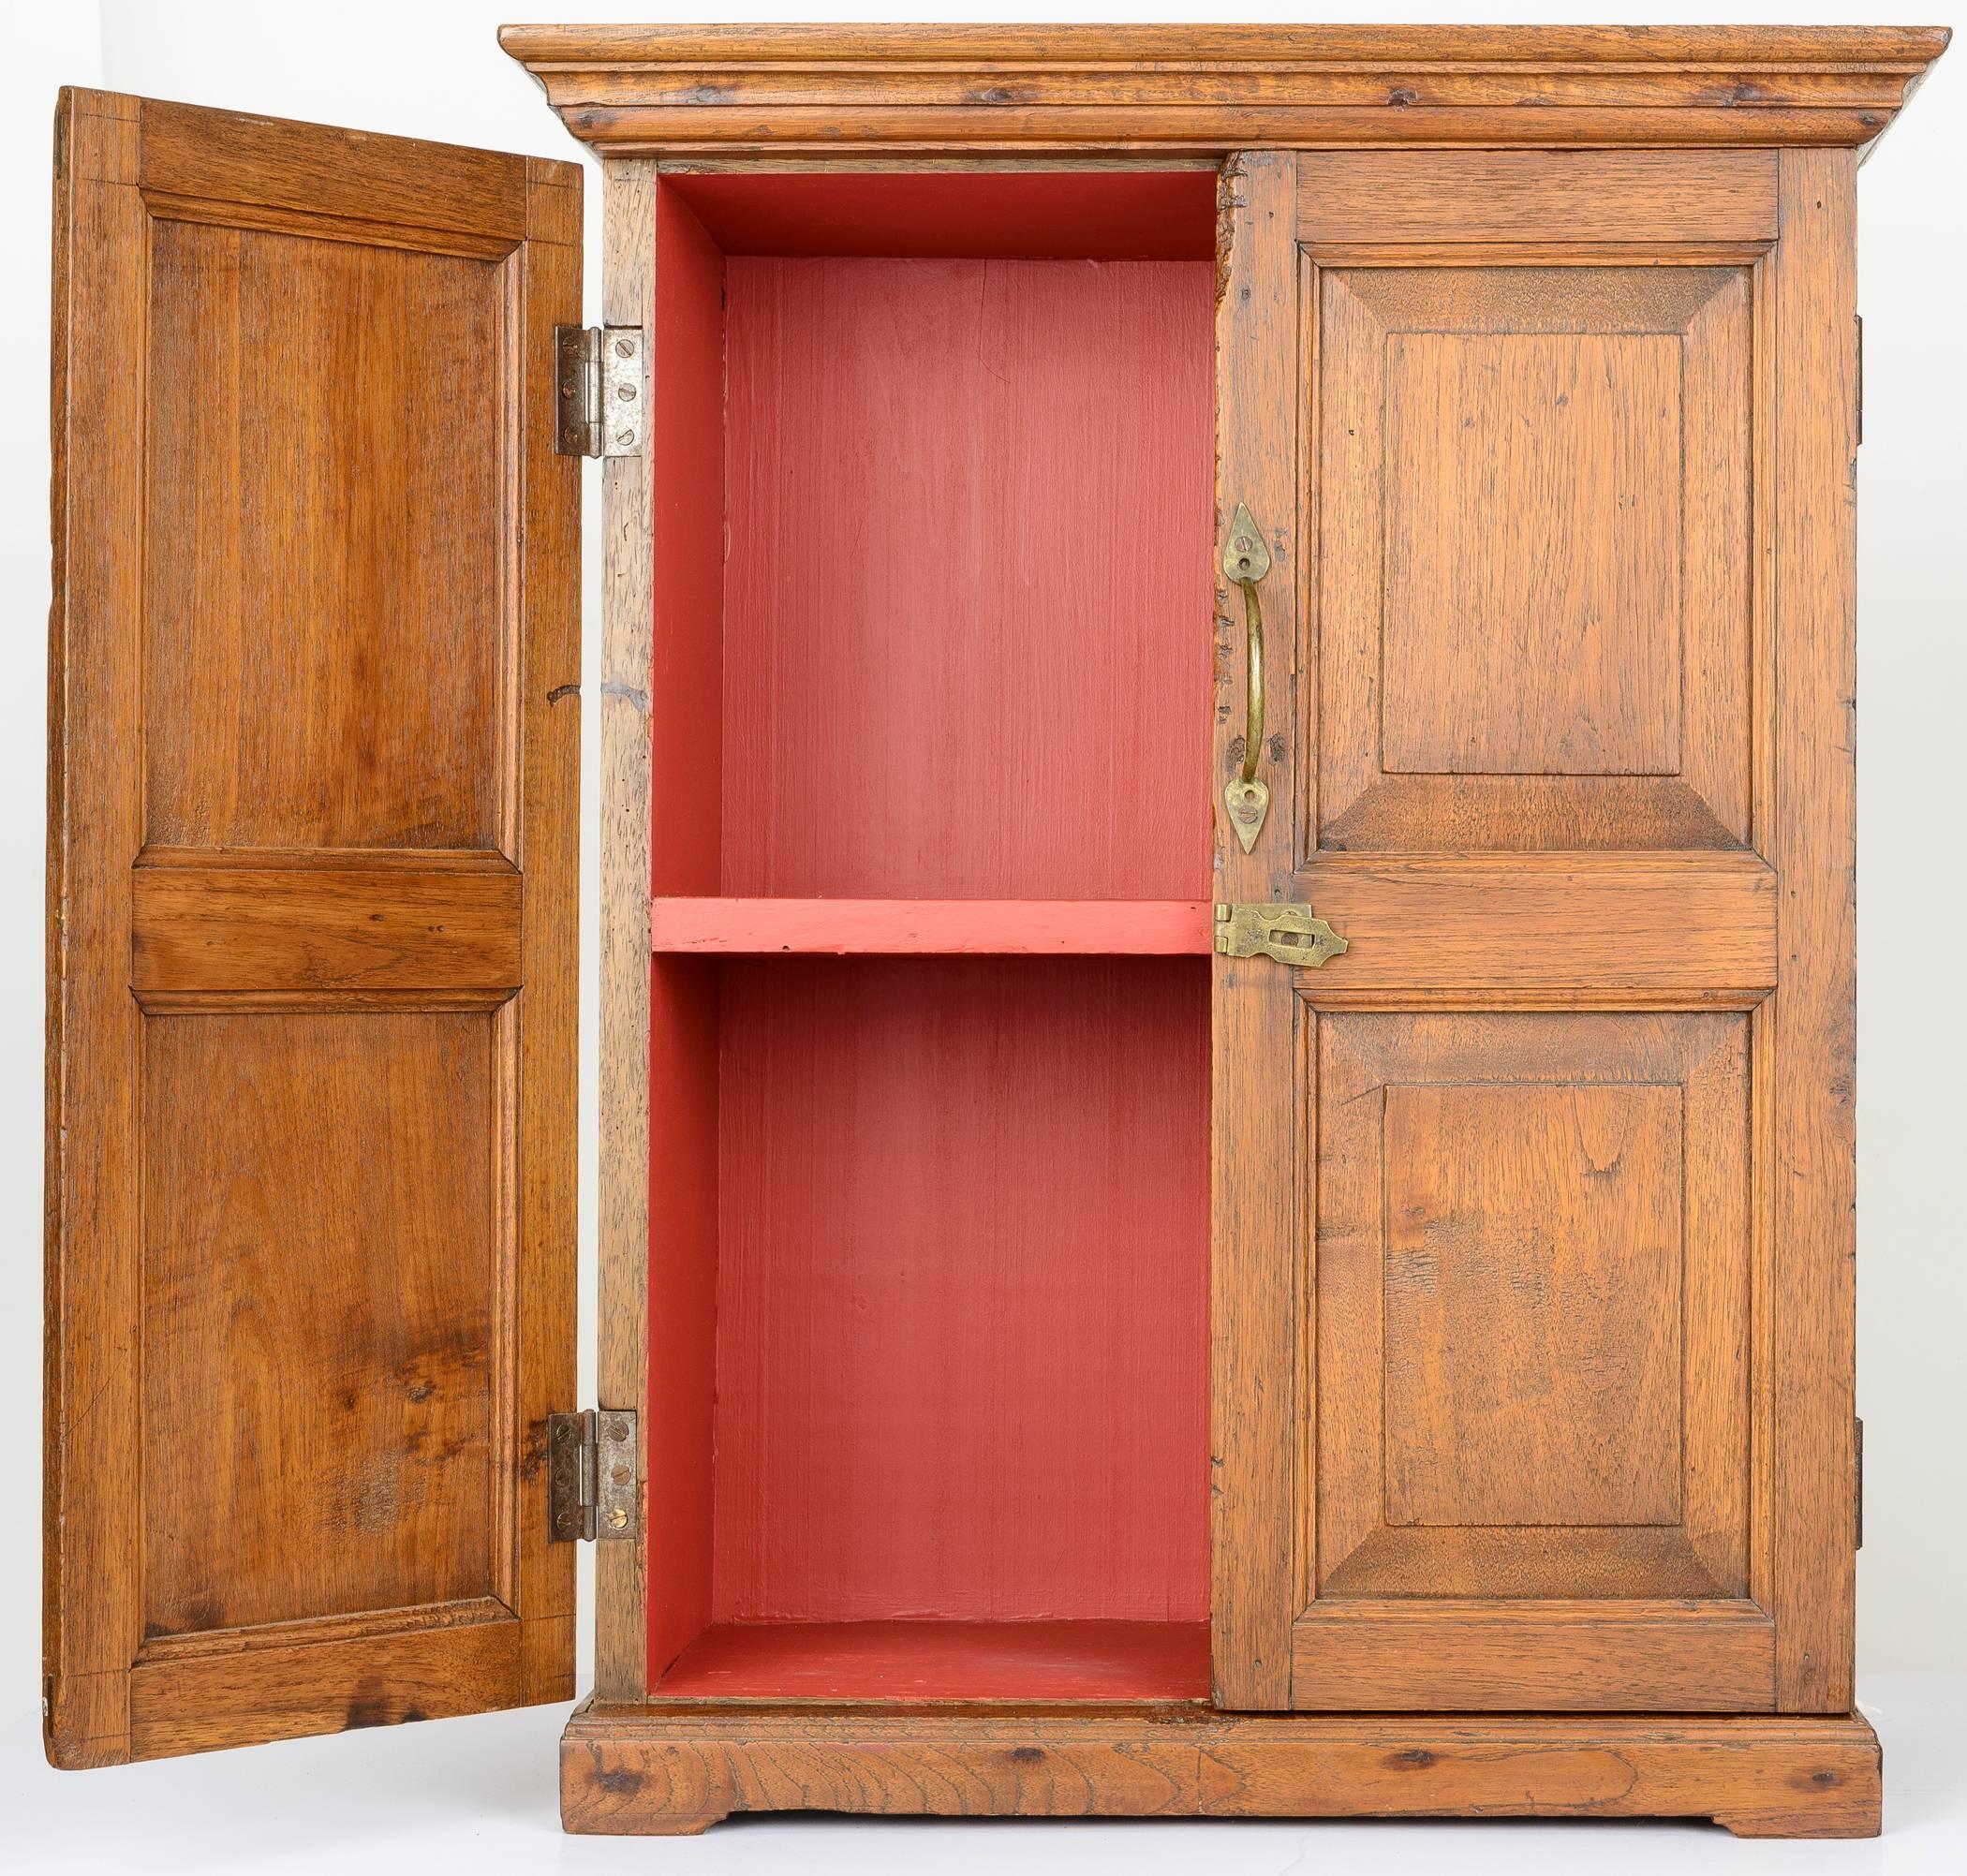 This small country Chippendale cupboard is finely crafted. The22. pair of two raised panel doors with outer molding. The cupboard has crown molding and rests on a base with apron. The brass handle pull and hatch lock are original. The hinges are